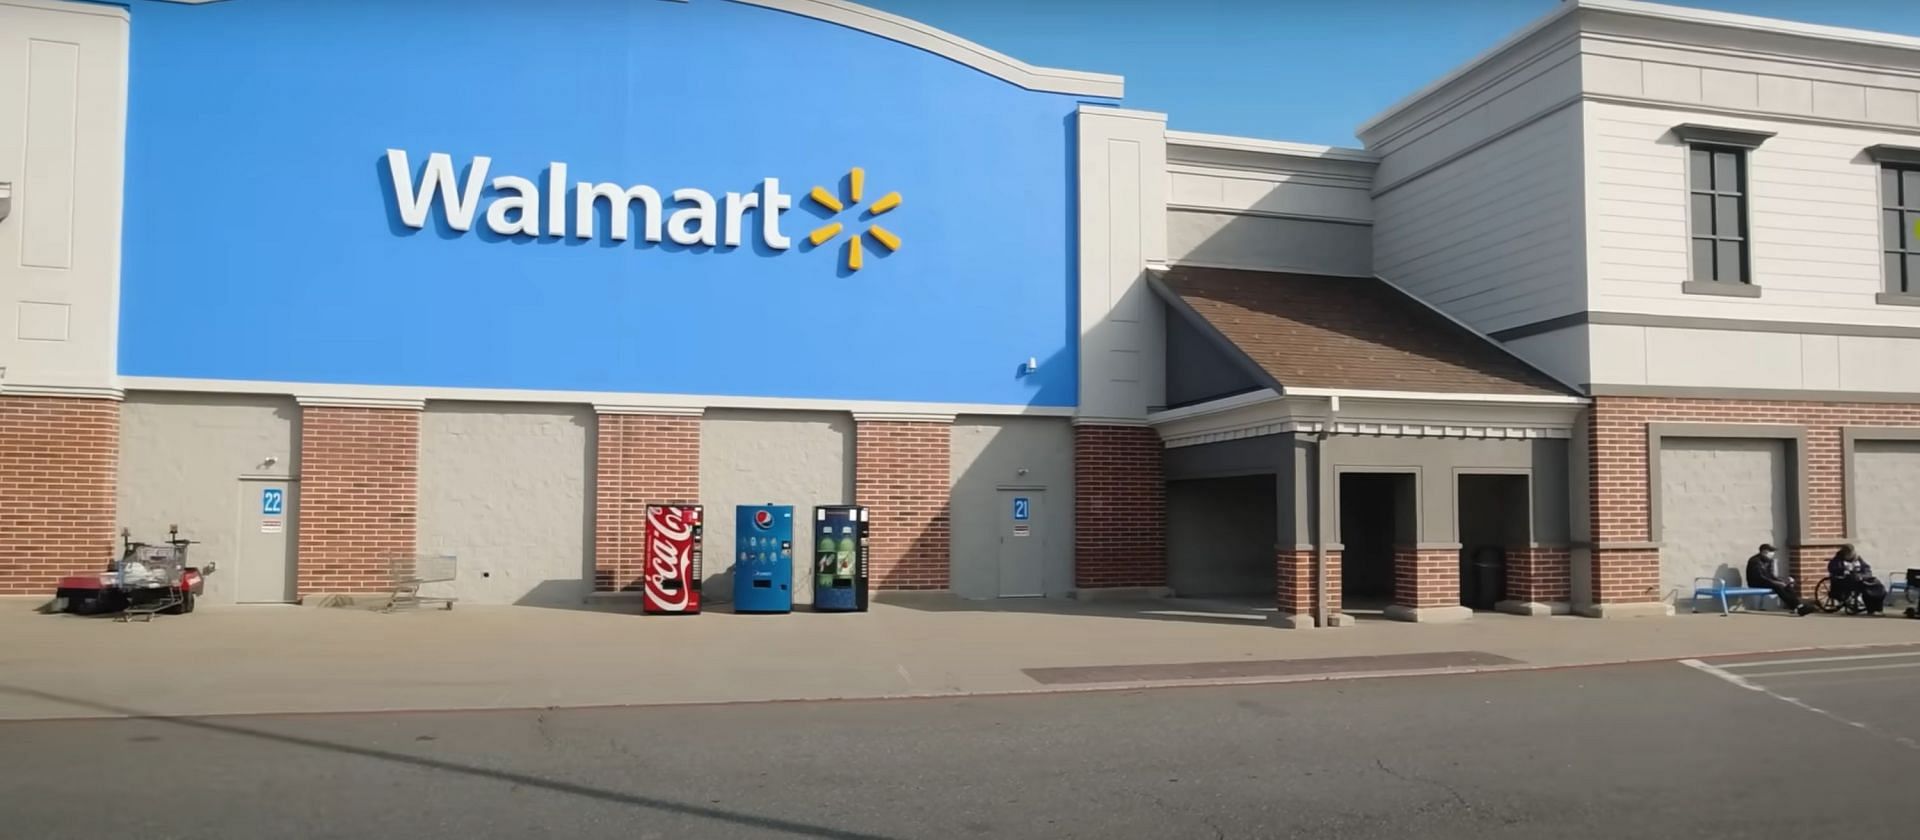 Texas man sues Walmart for $100 million after allegedly being wrongfully accused of shoplifting (Image via Stewart Hicks/YouTube)